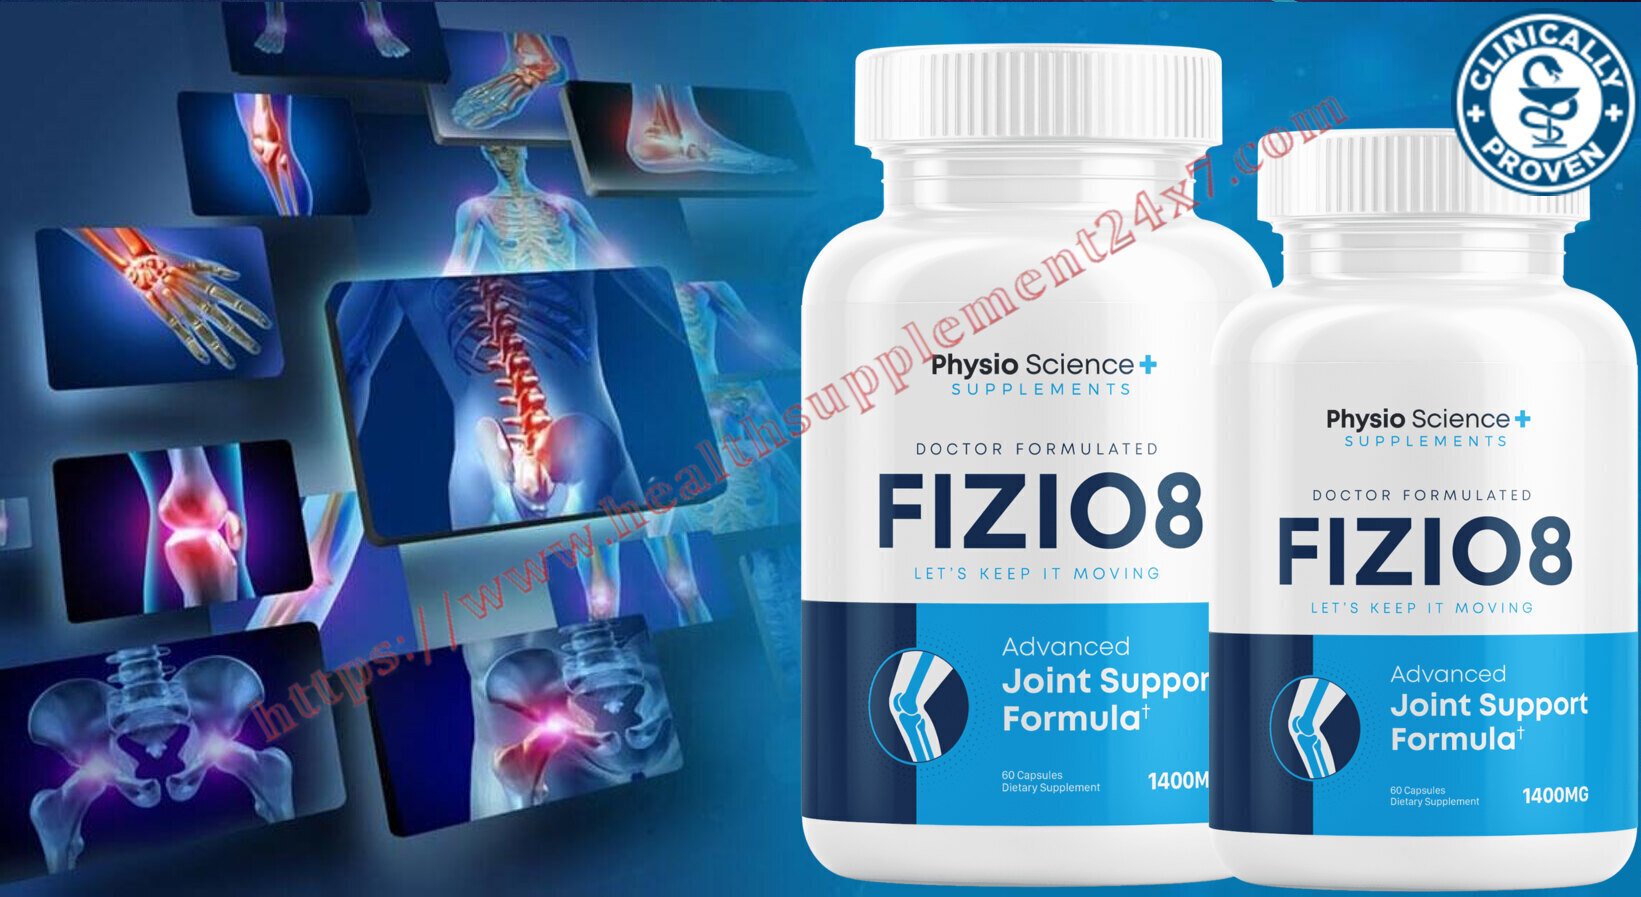 Fizio8 joint support formula 5